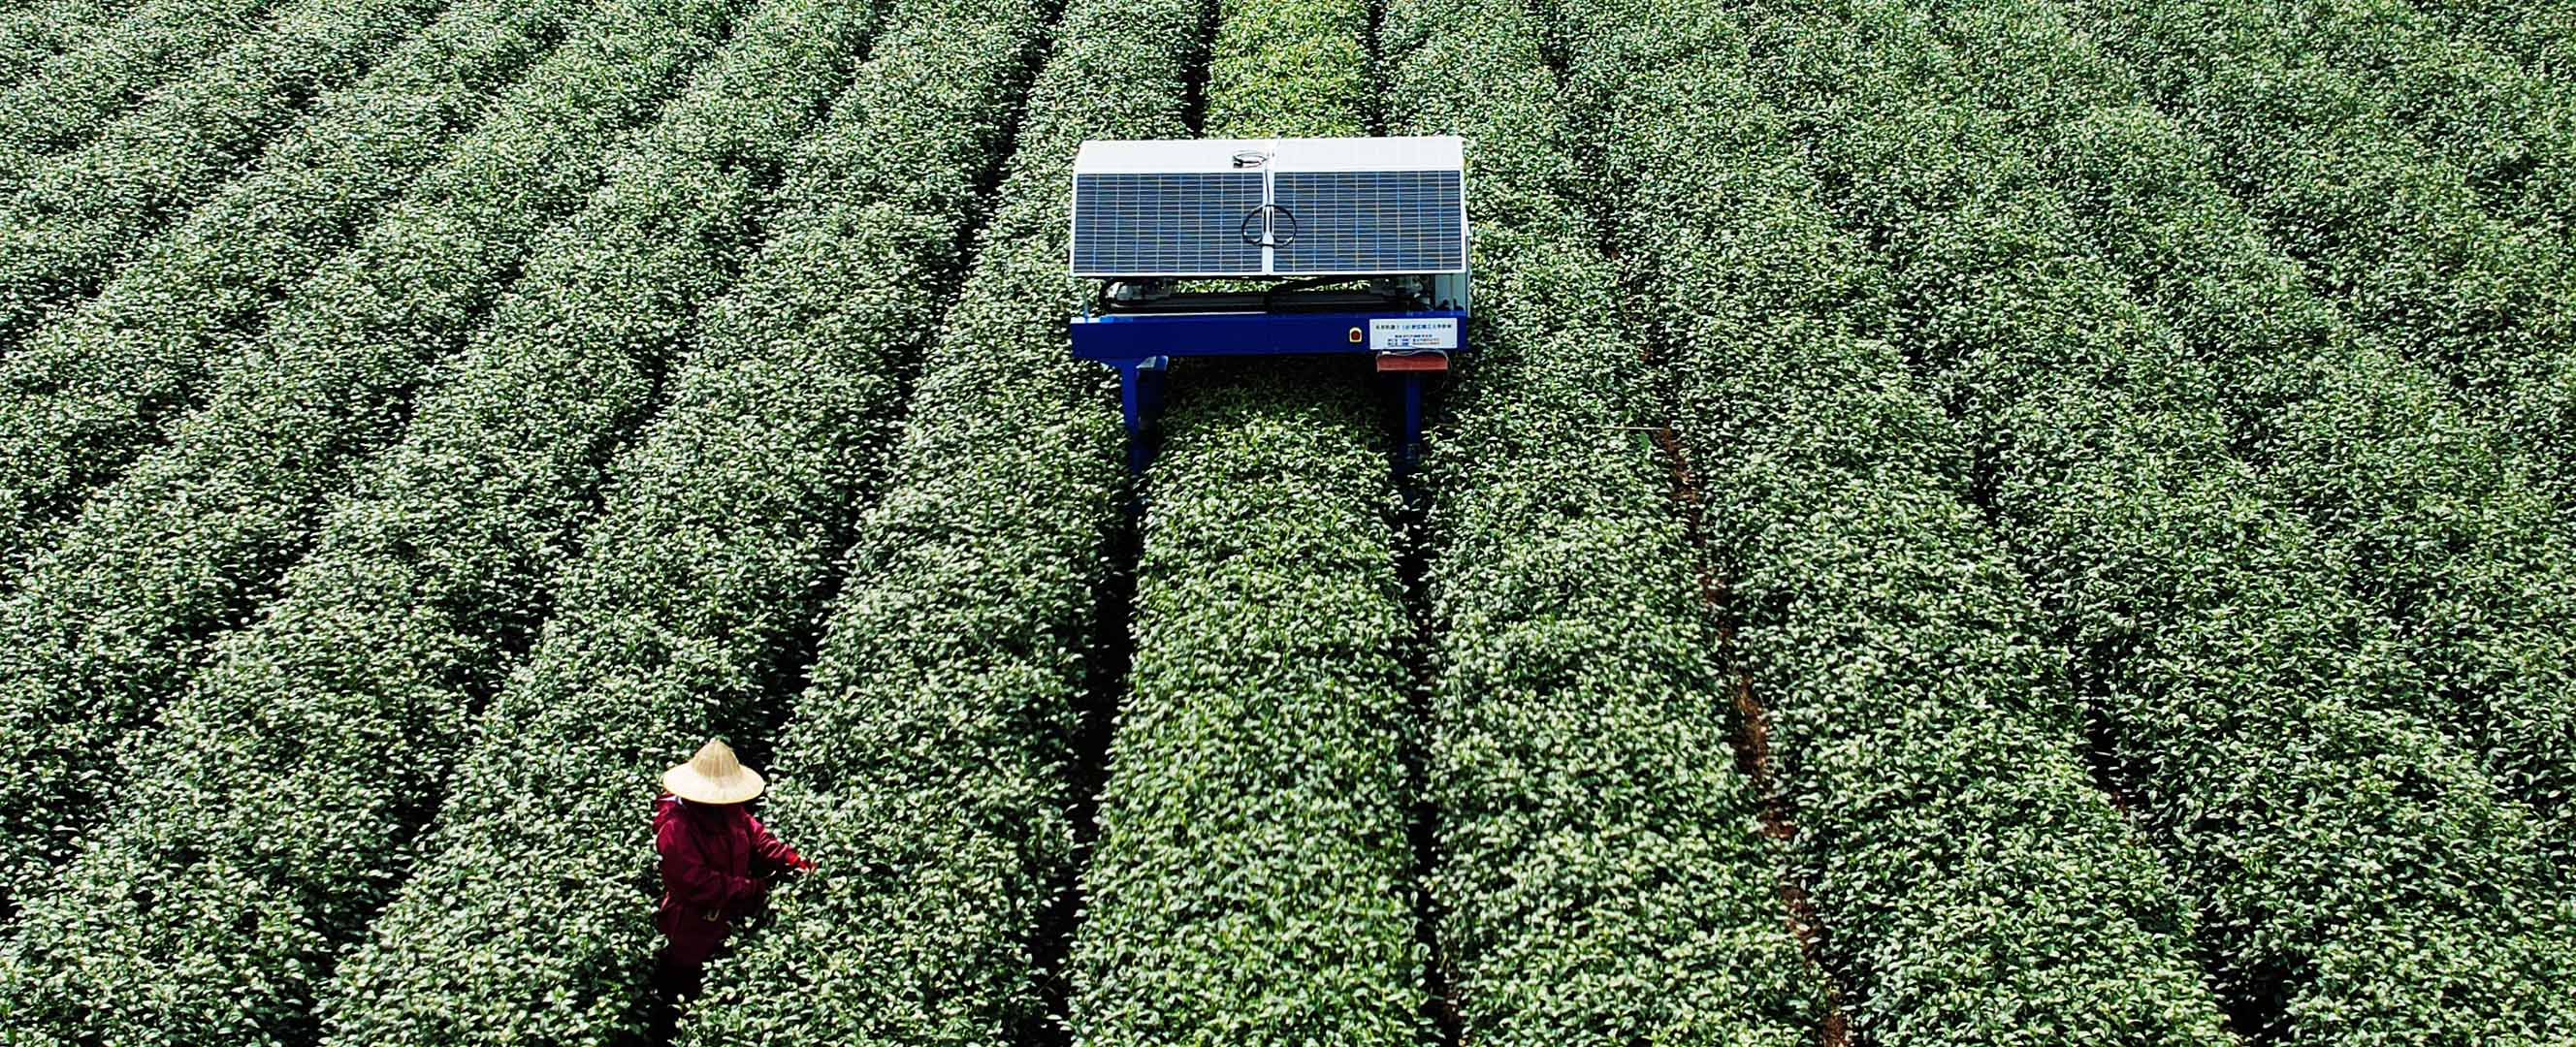 Tea plantation in Hangzhou, China: AIdriven smart agriculture provides tremendous potential for boosting food security and to reduce or even end hunger in many regions.